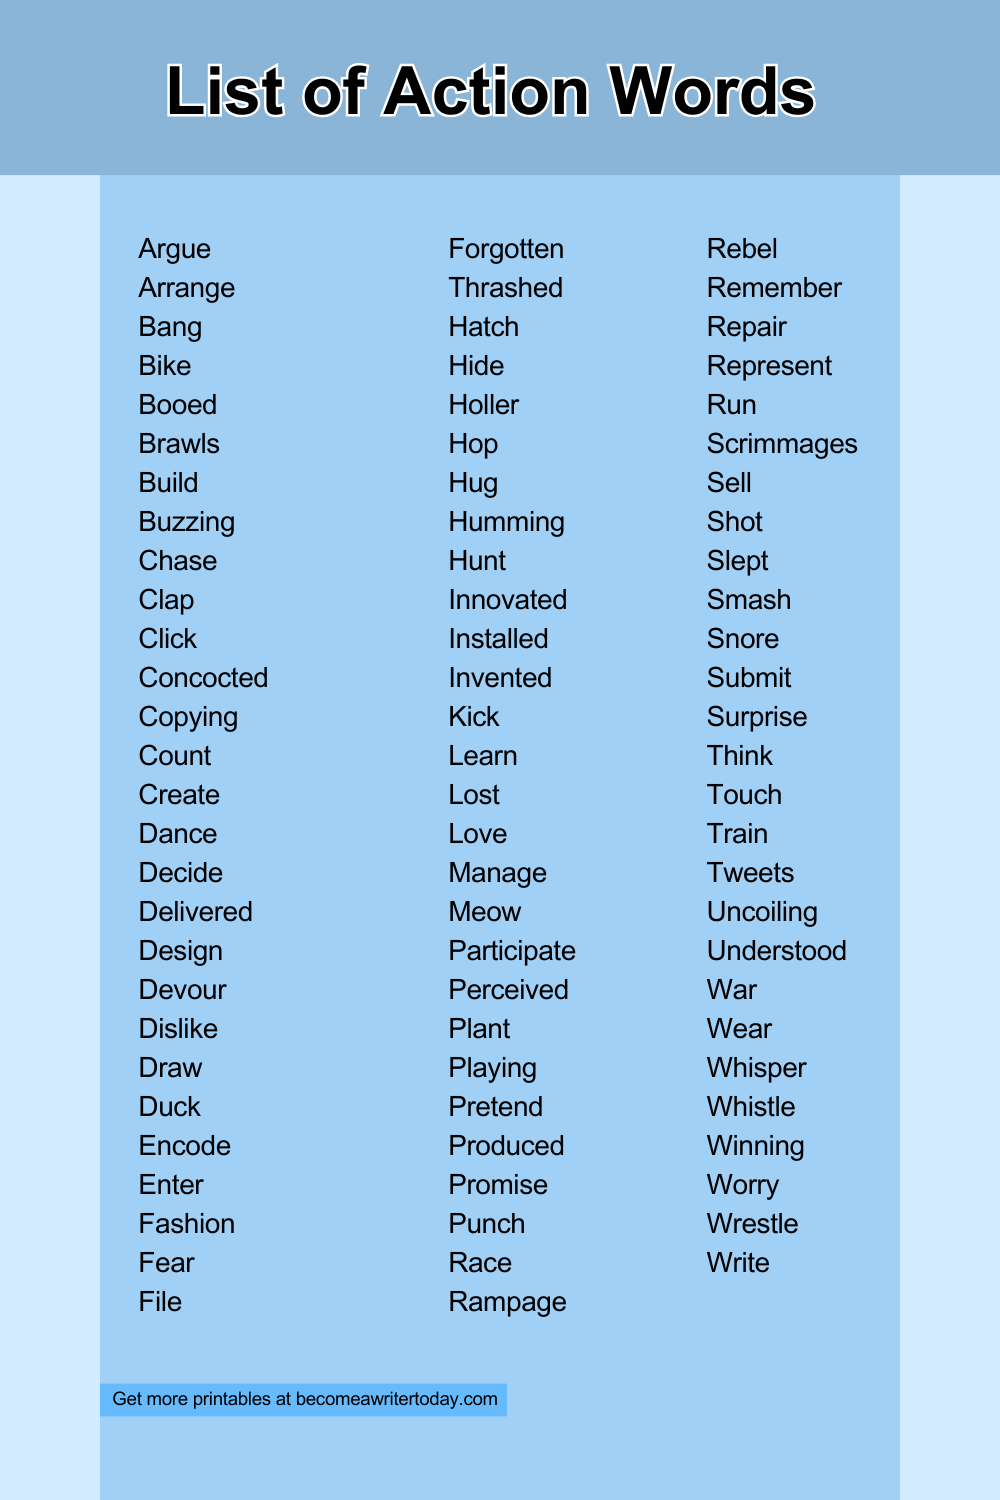 List of action words 